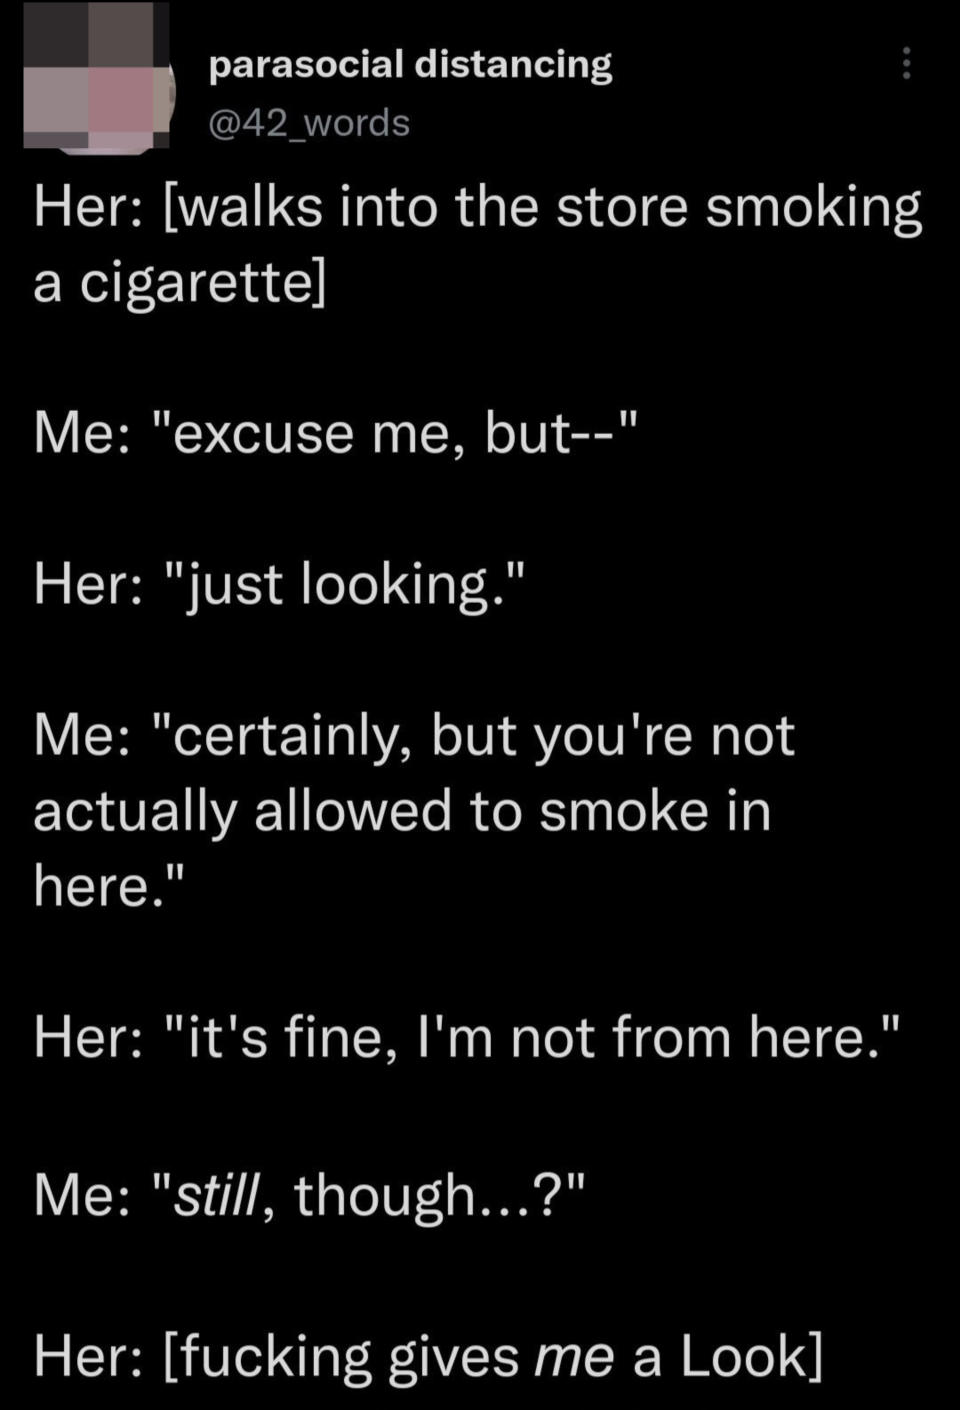 customer walks in smoking a cigarette and refuses to stop